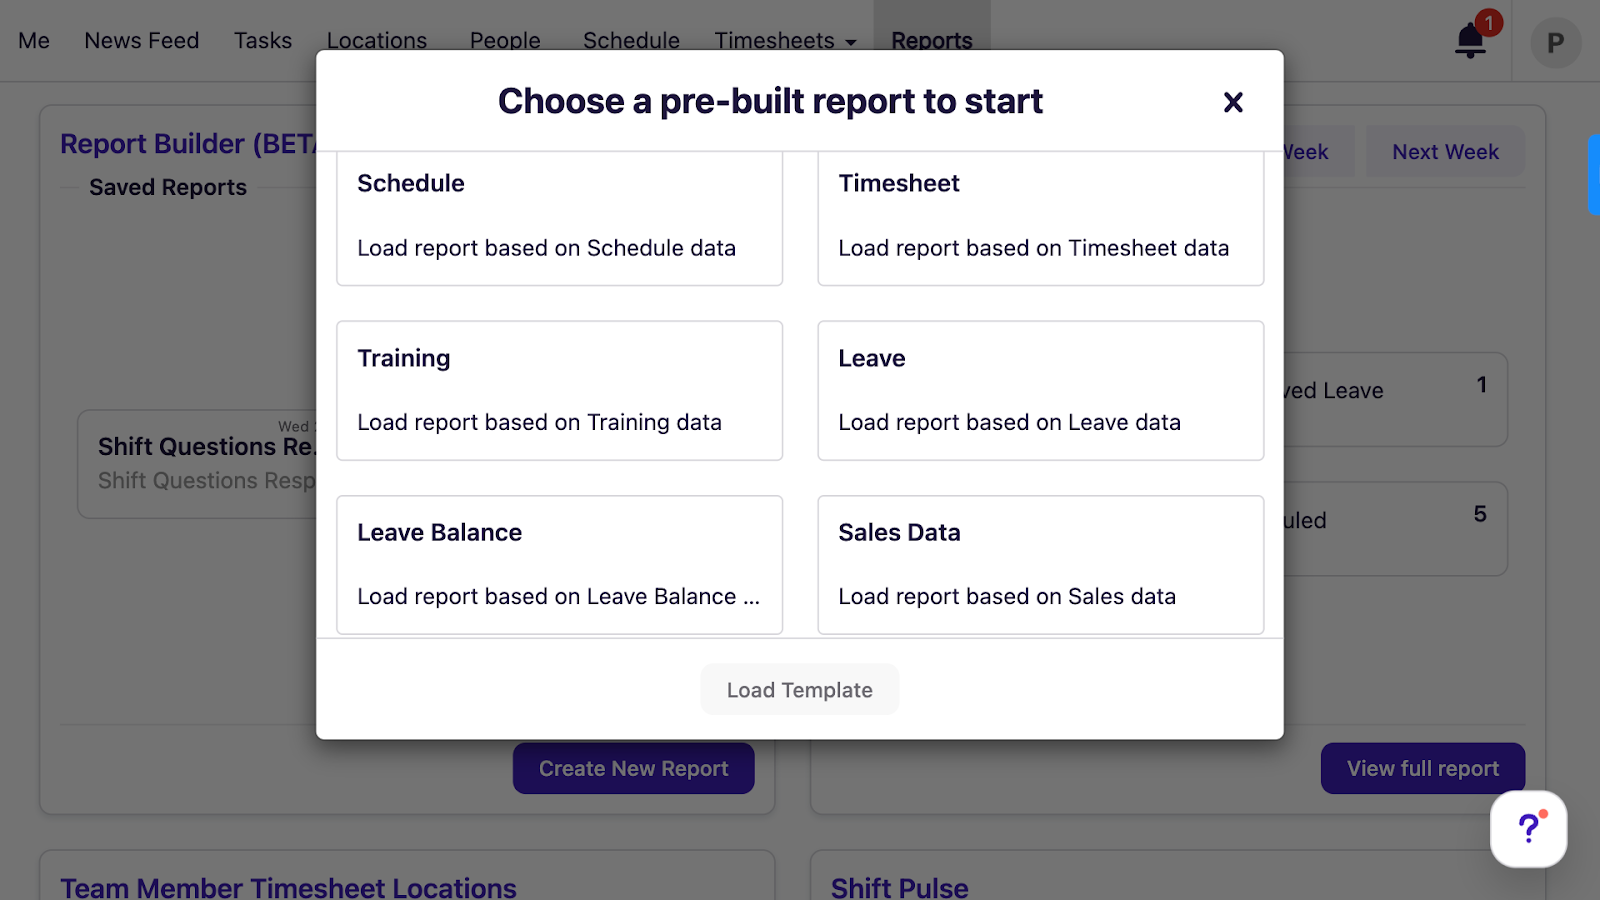 Alt text: Deputy’s custom build reporting tool offering pre-built templates for specific areas of reporting.